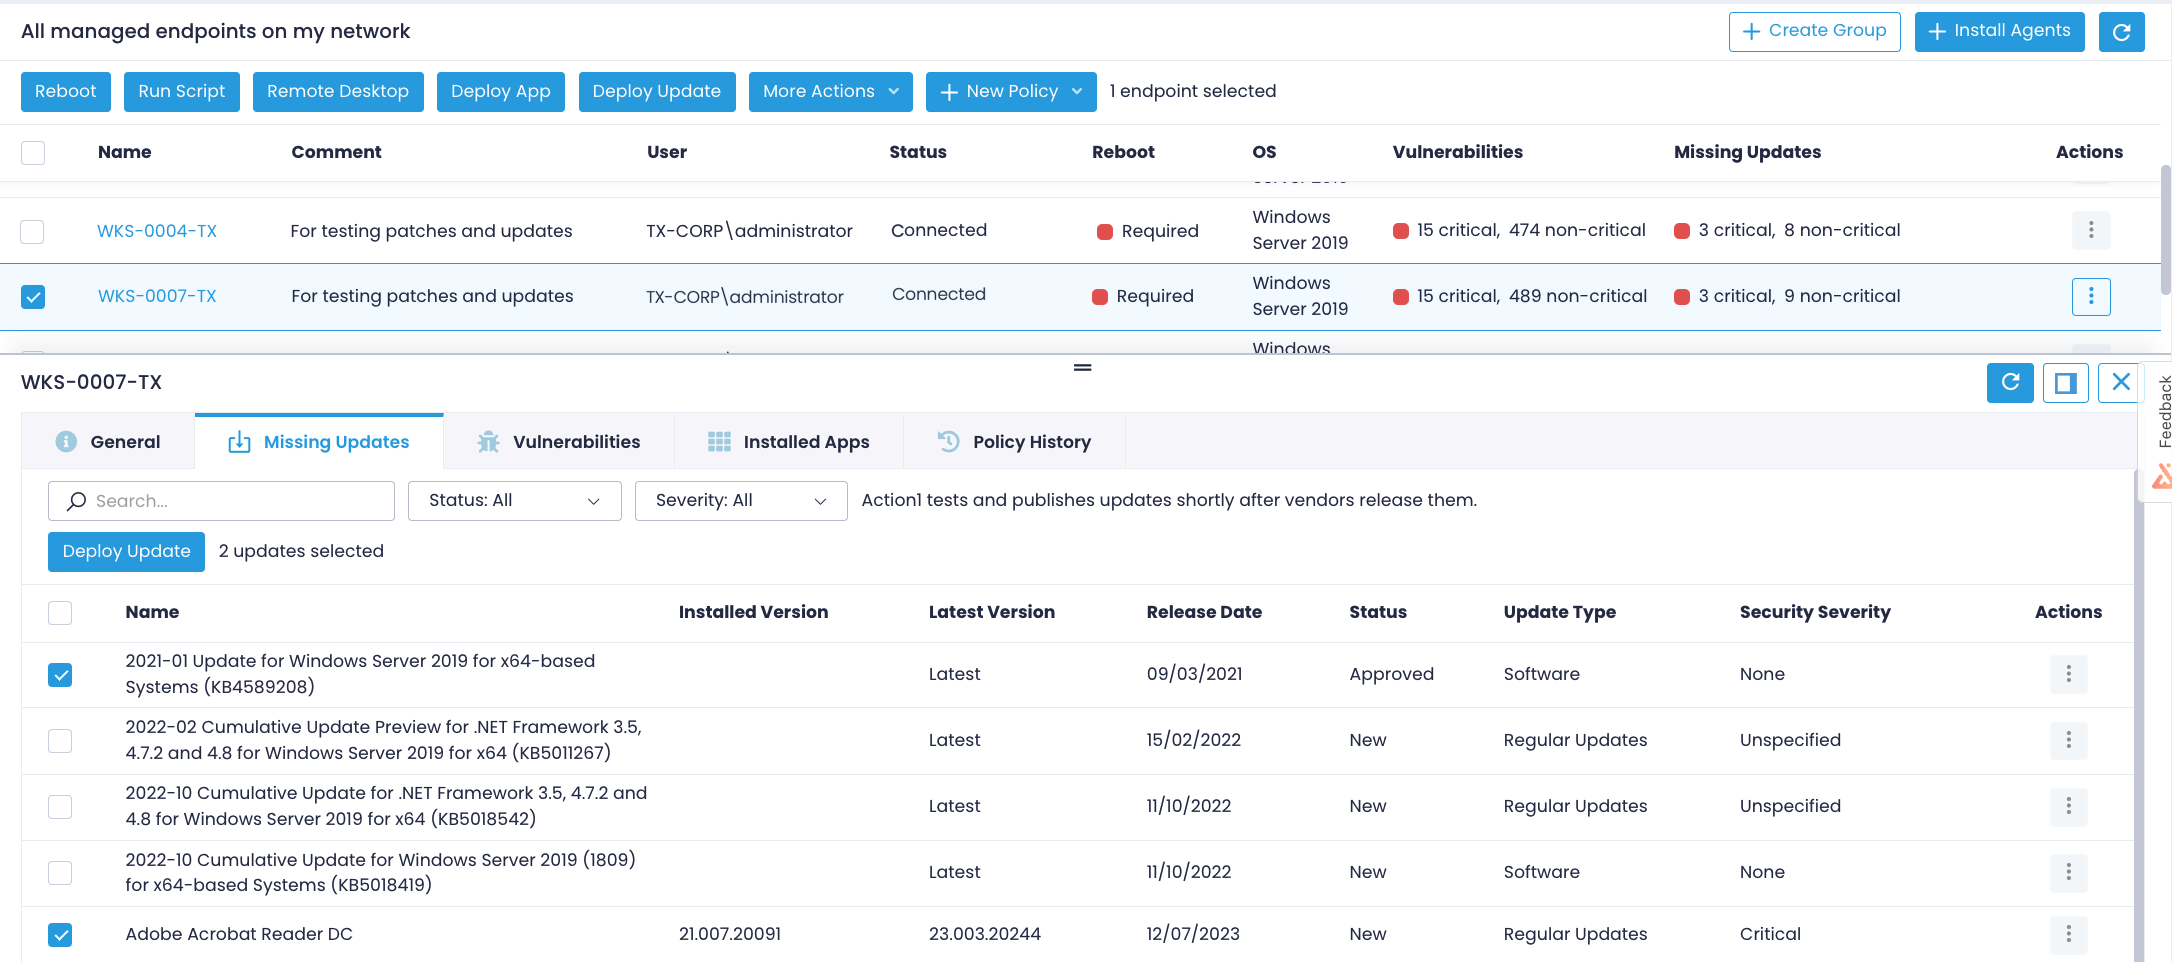 Managed endpoints dashboard with expanded Missing Updates tab